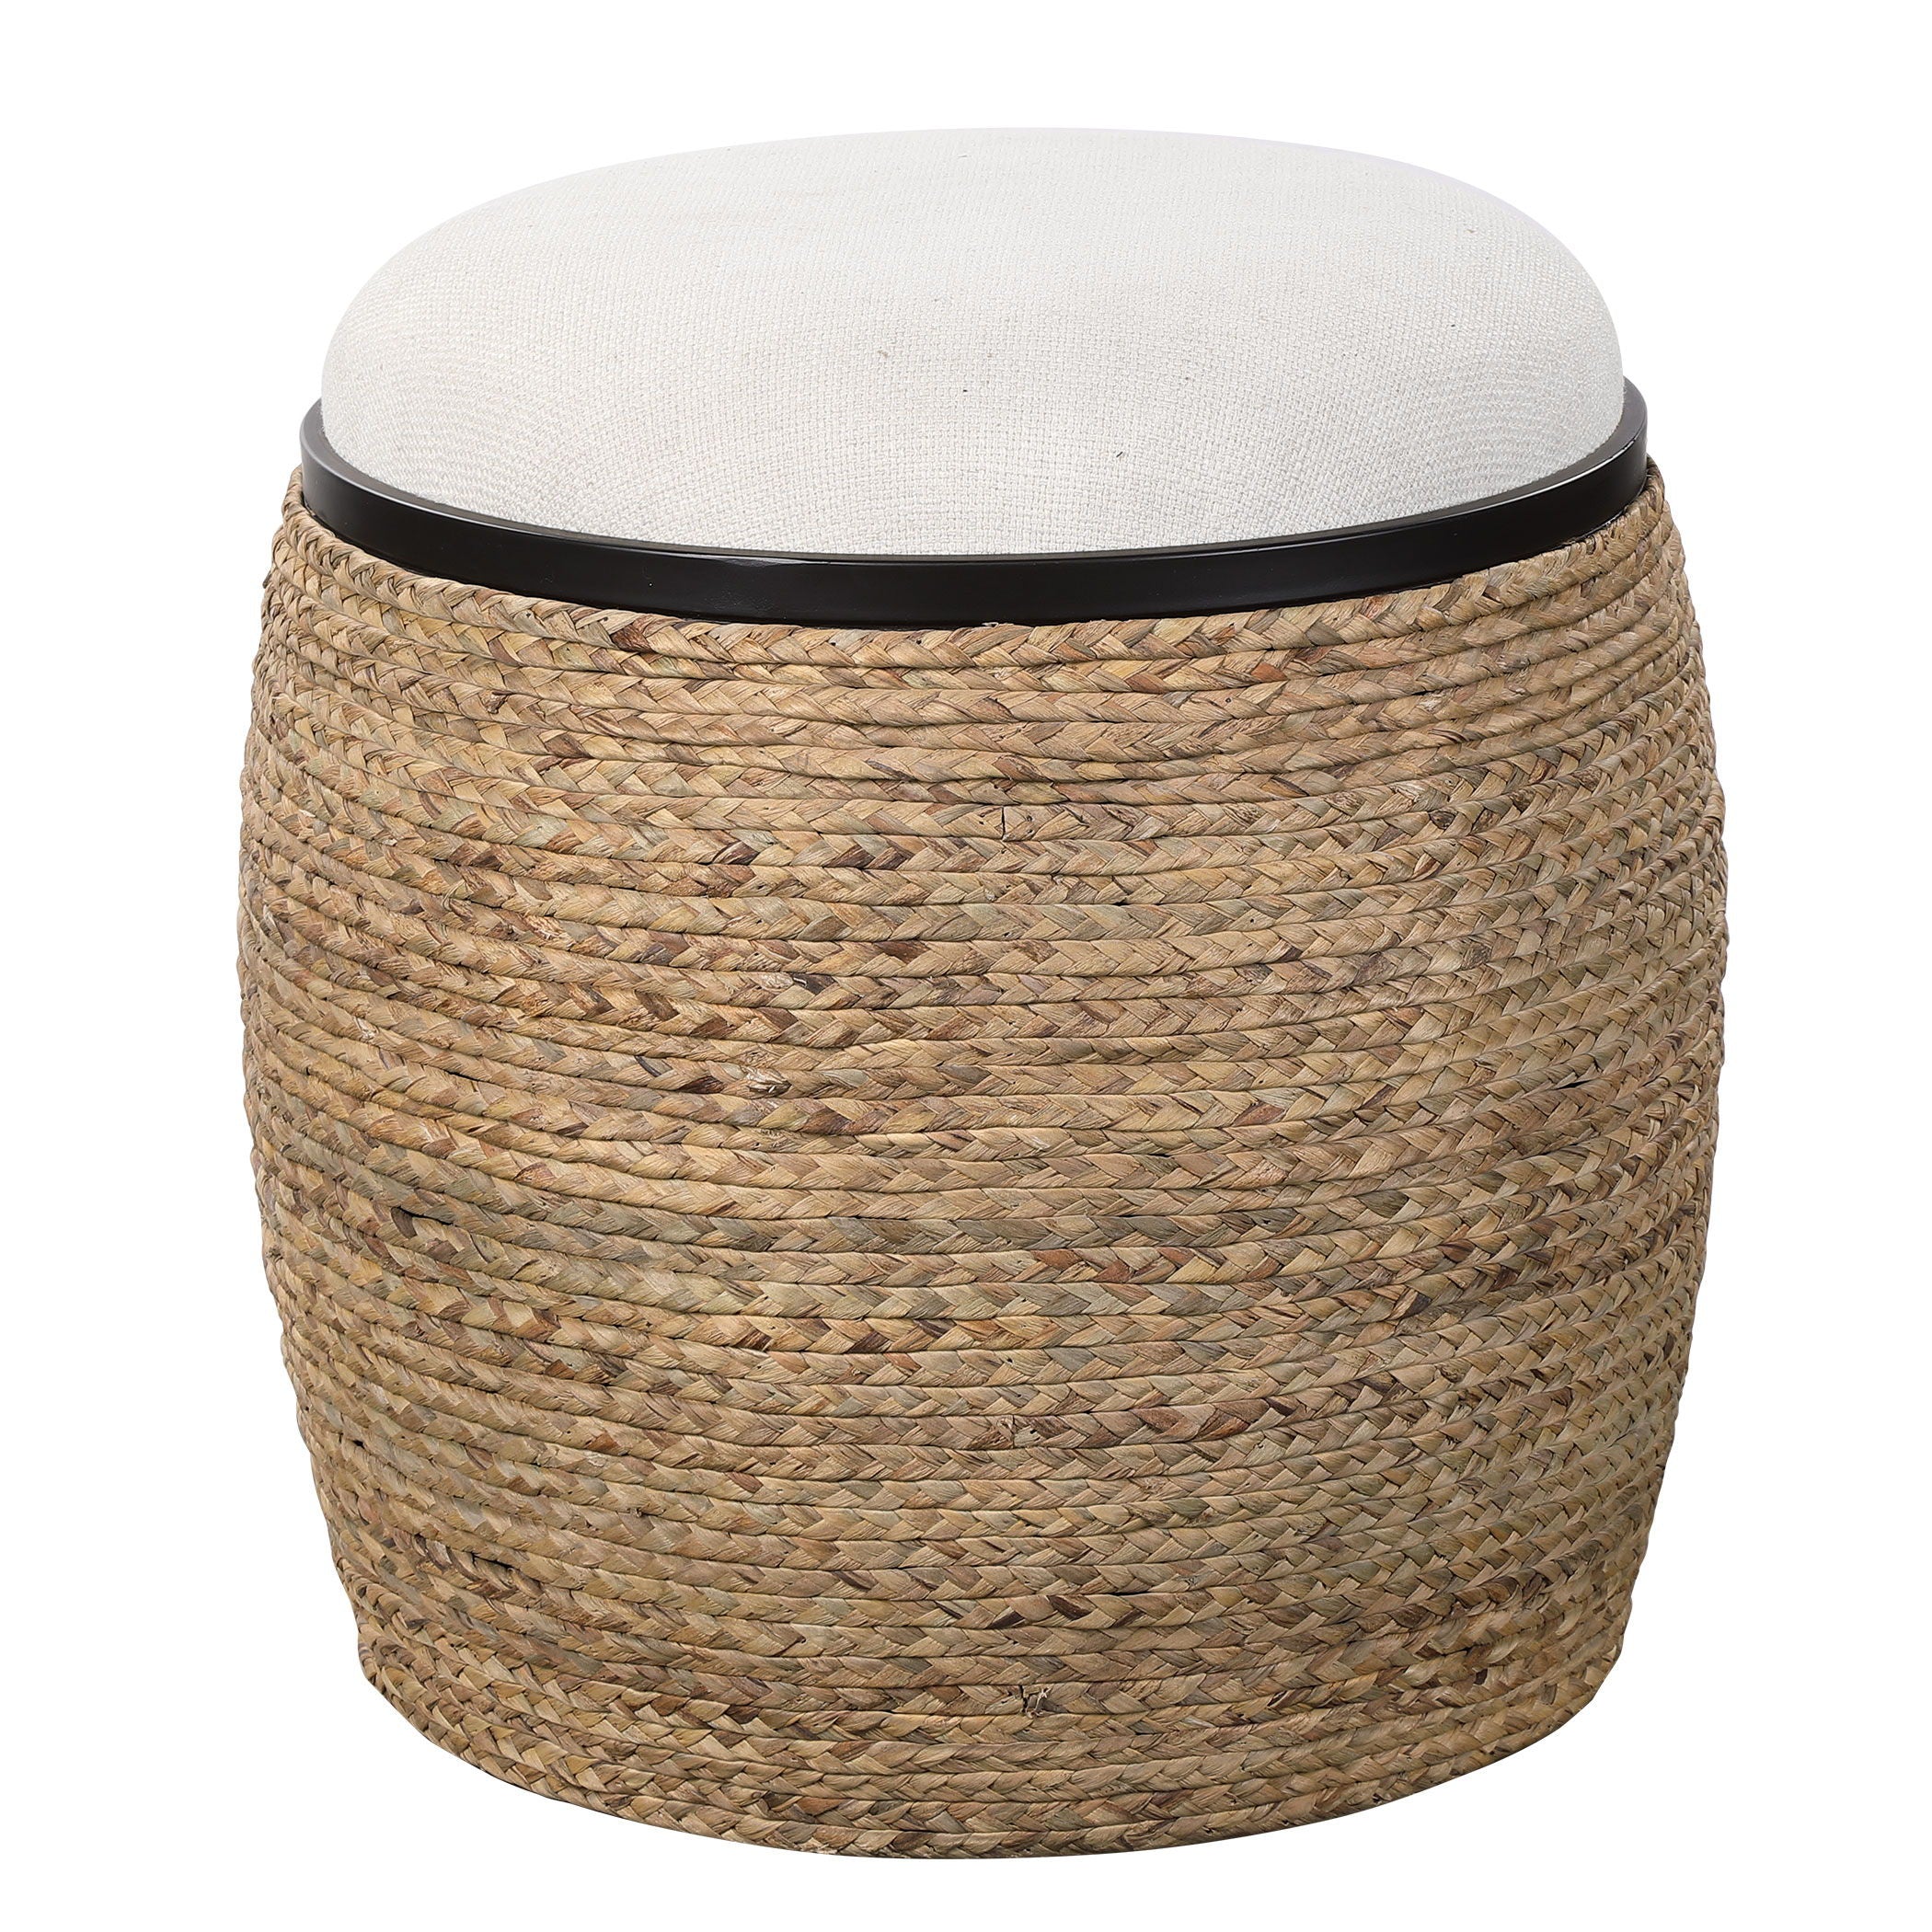 Island - Straw Accent Stool - White & Light Brown